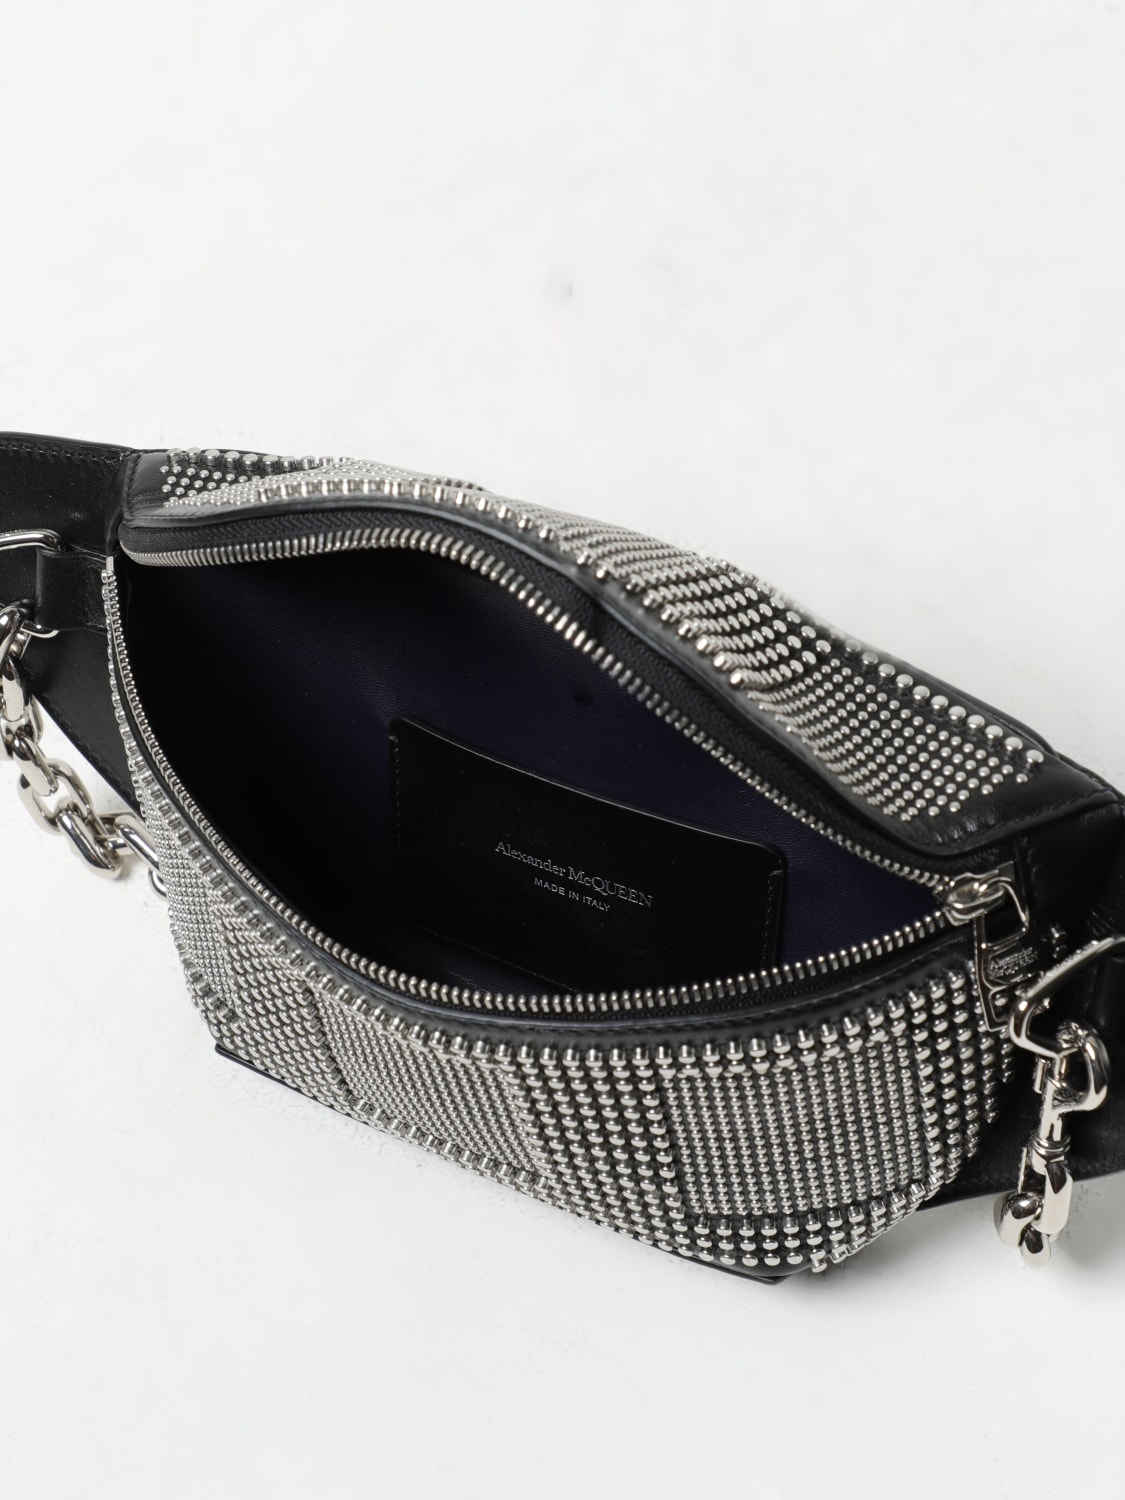 Alexander McQueen leather belt bag with all-over studs - 5